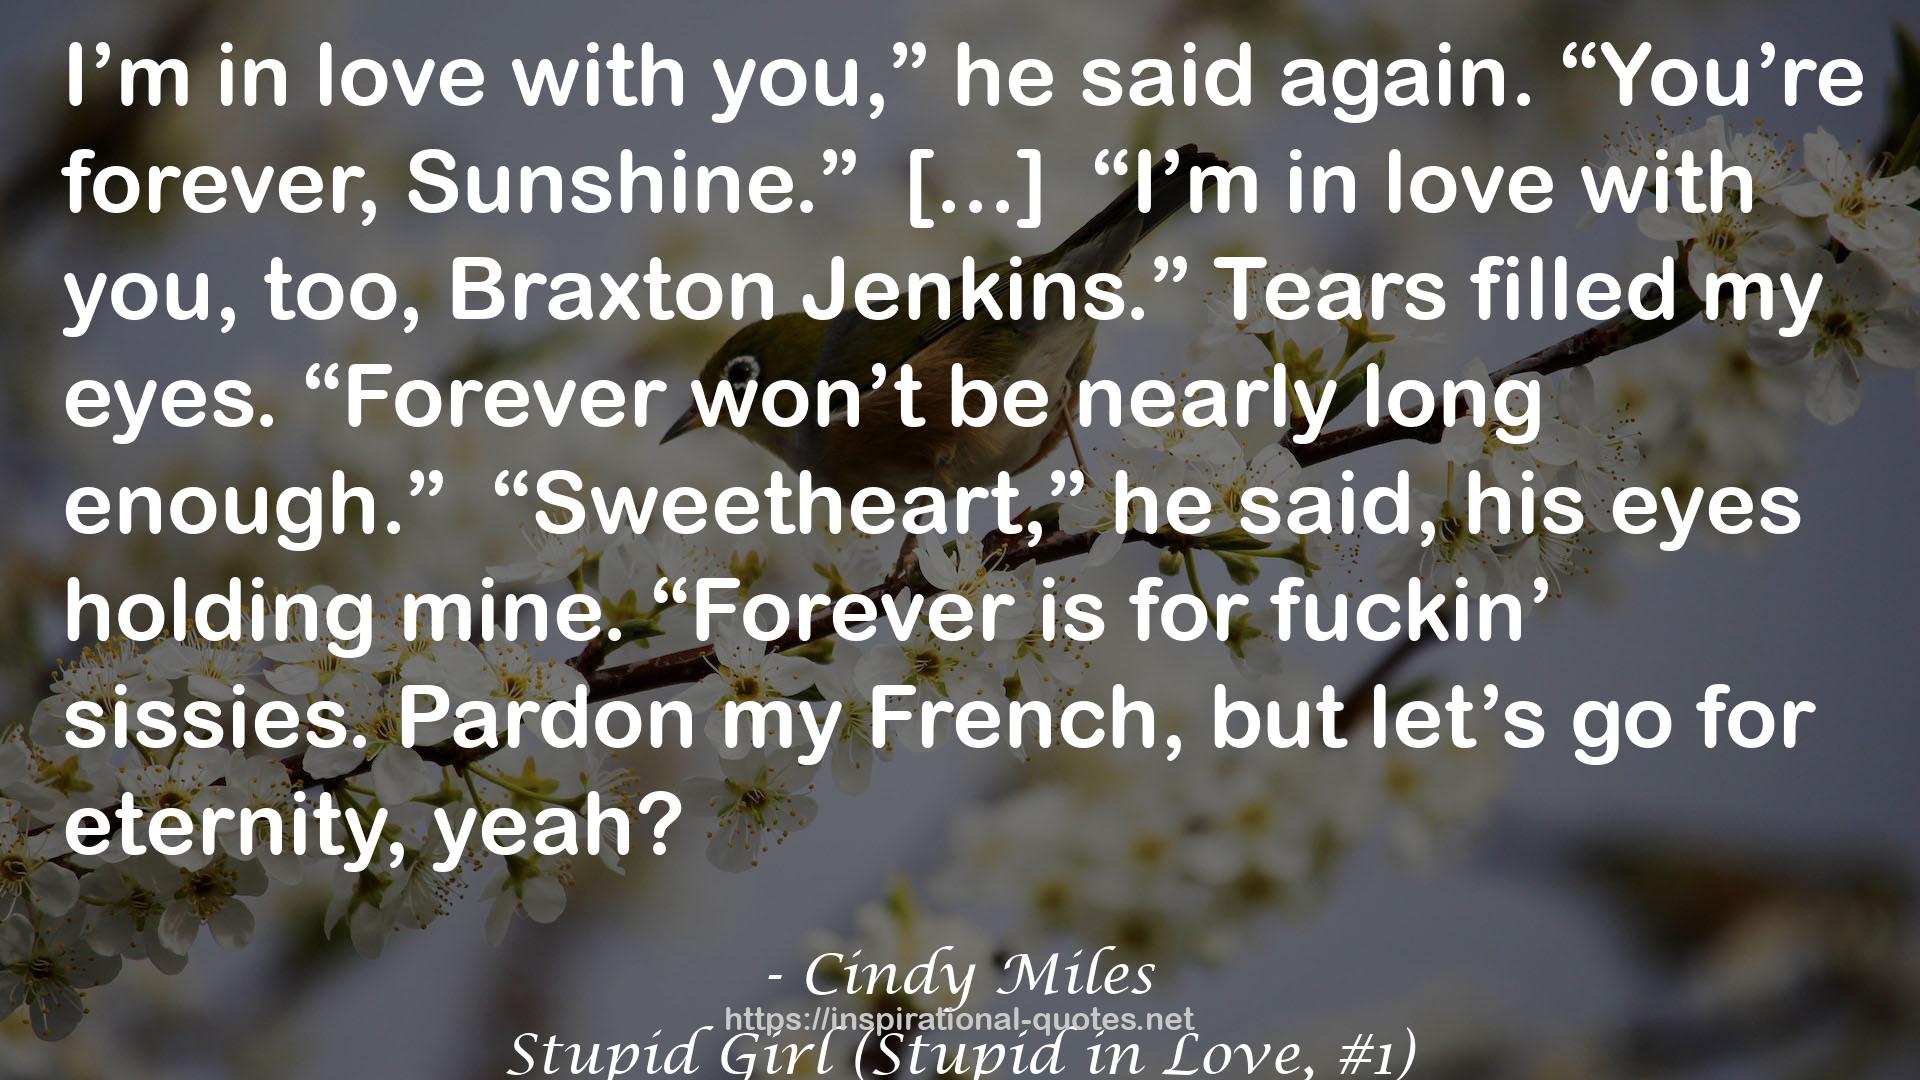 Stupid Girl (Stupid in Love, #1) QUOTES